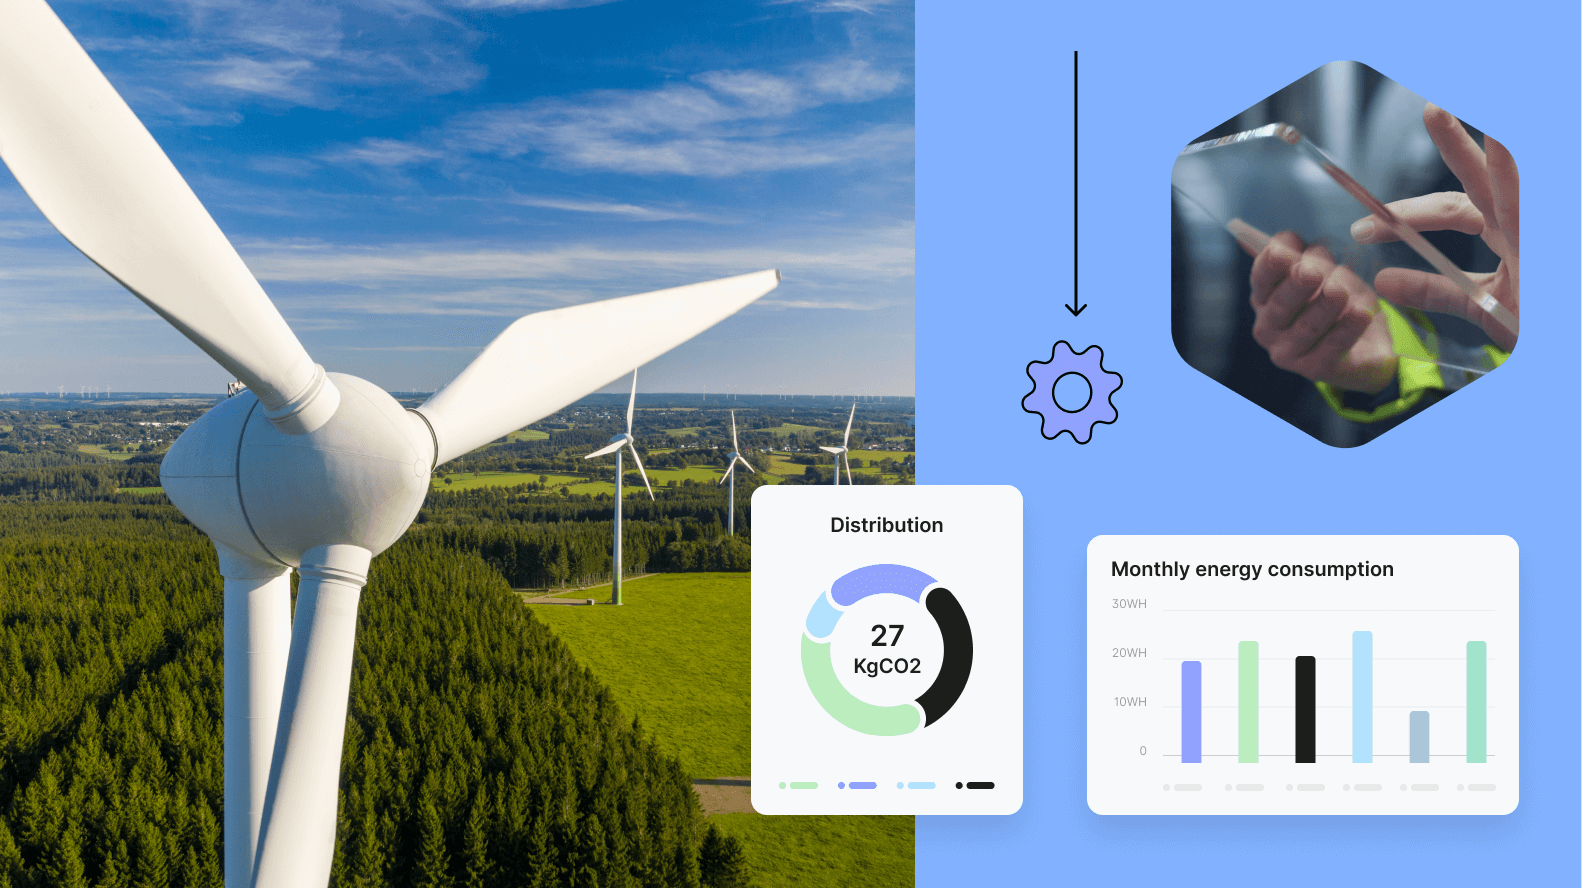 A concept of software solution for energy market depicting a wind turbine, software dashboards and mobile tablet user